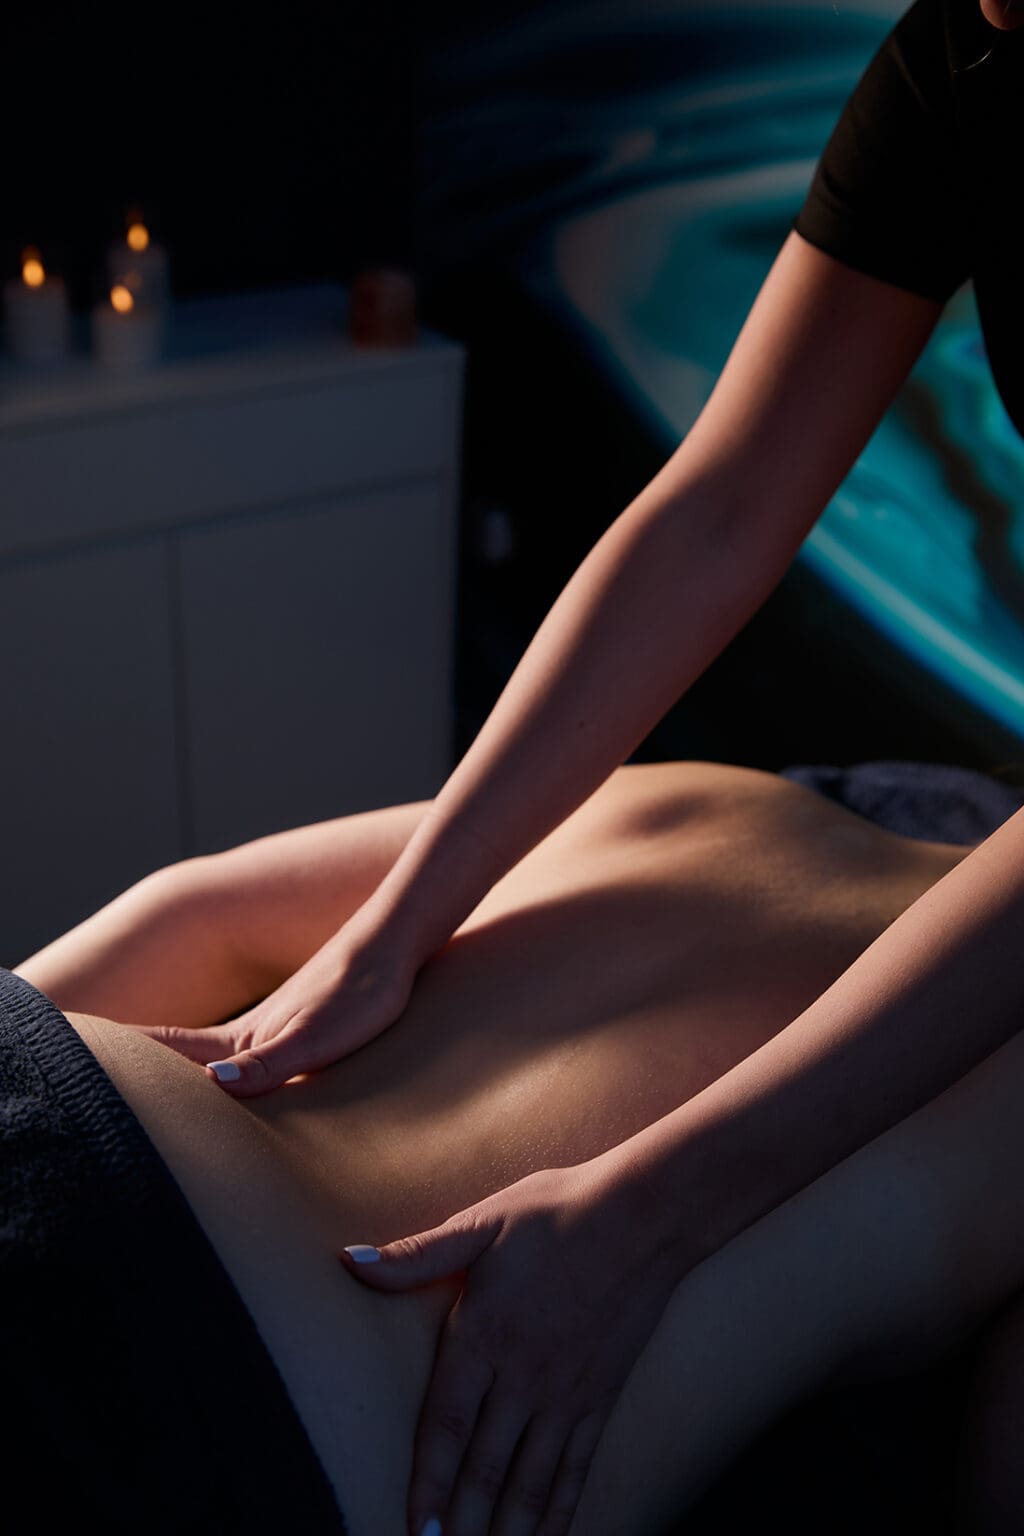 a massage therapists hands can be seen giving a back massage in a darkened room, there are candles in the background